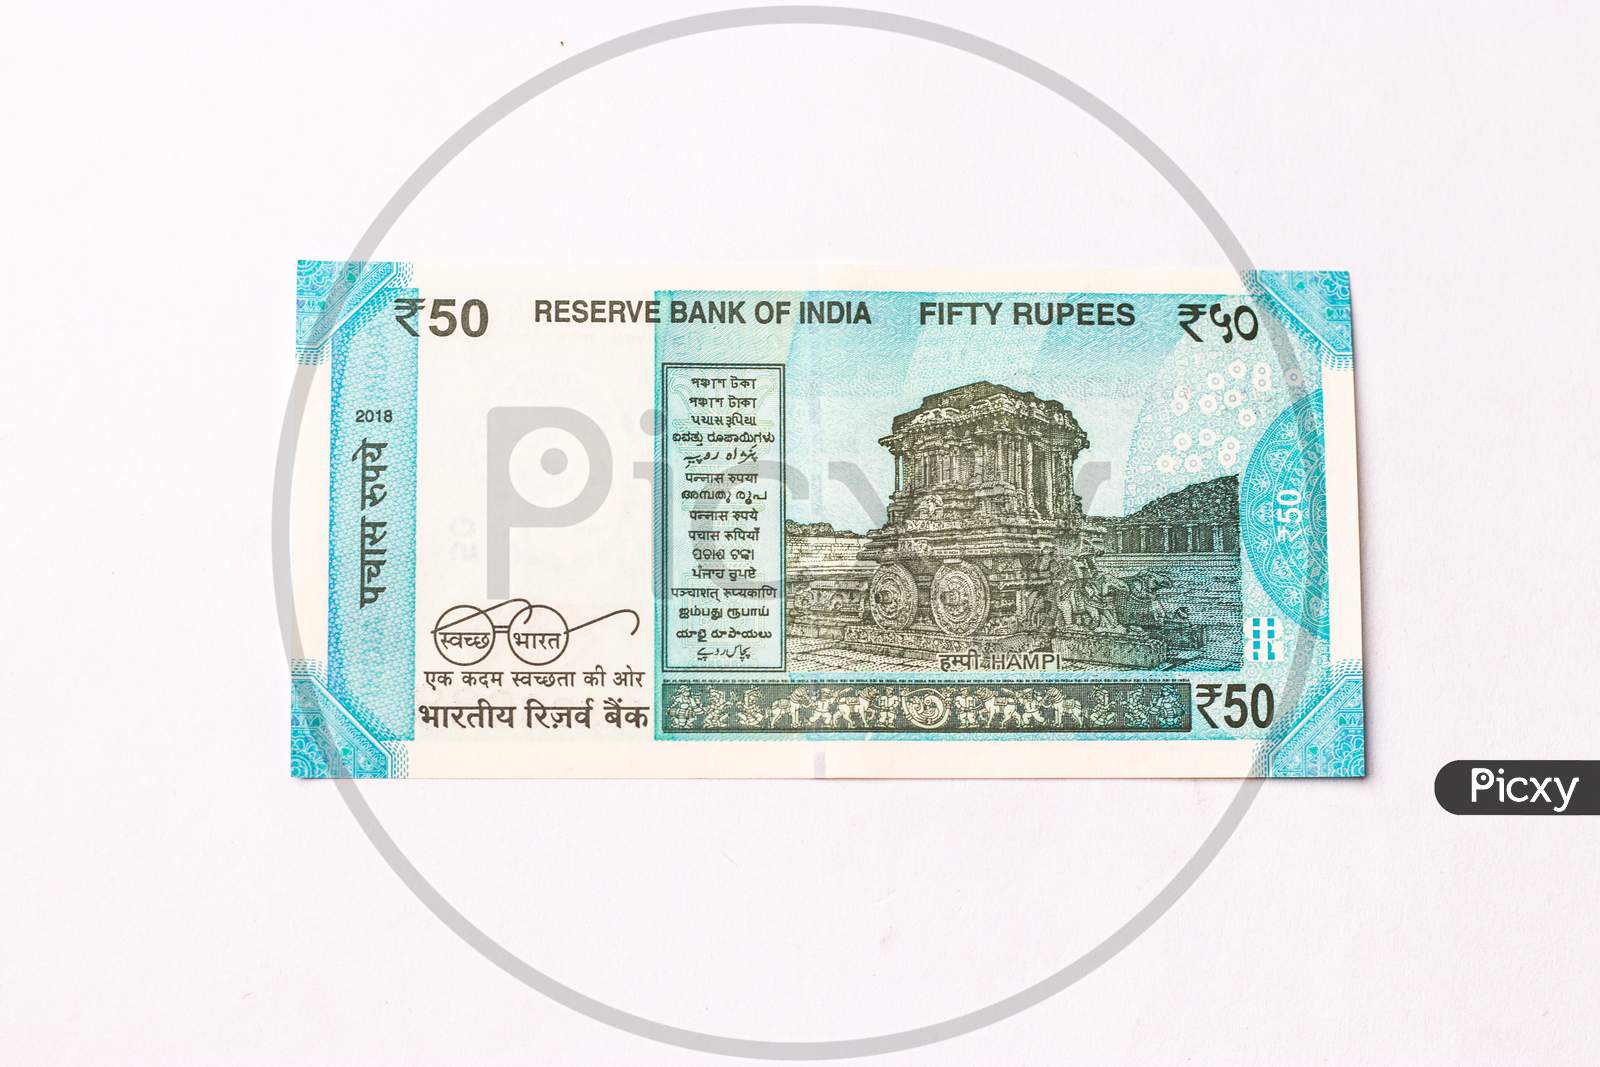 Assam, india - March 30, 2021 : Indian 50 Rupees note stock image.